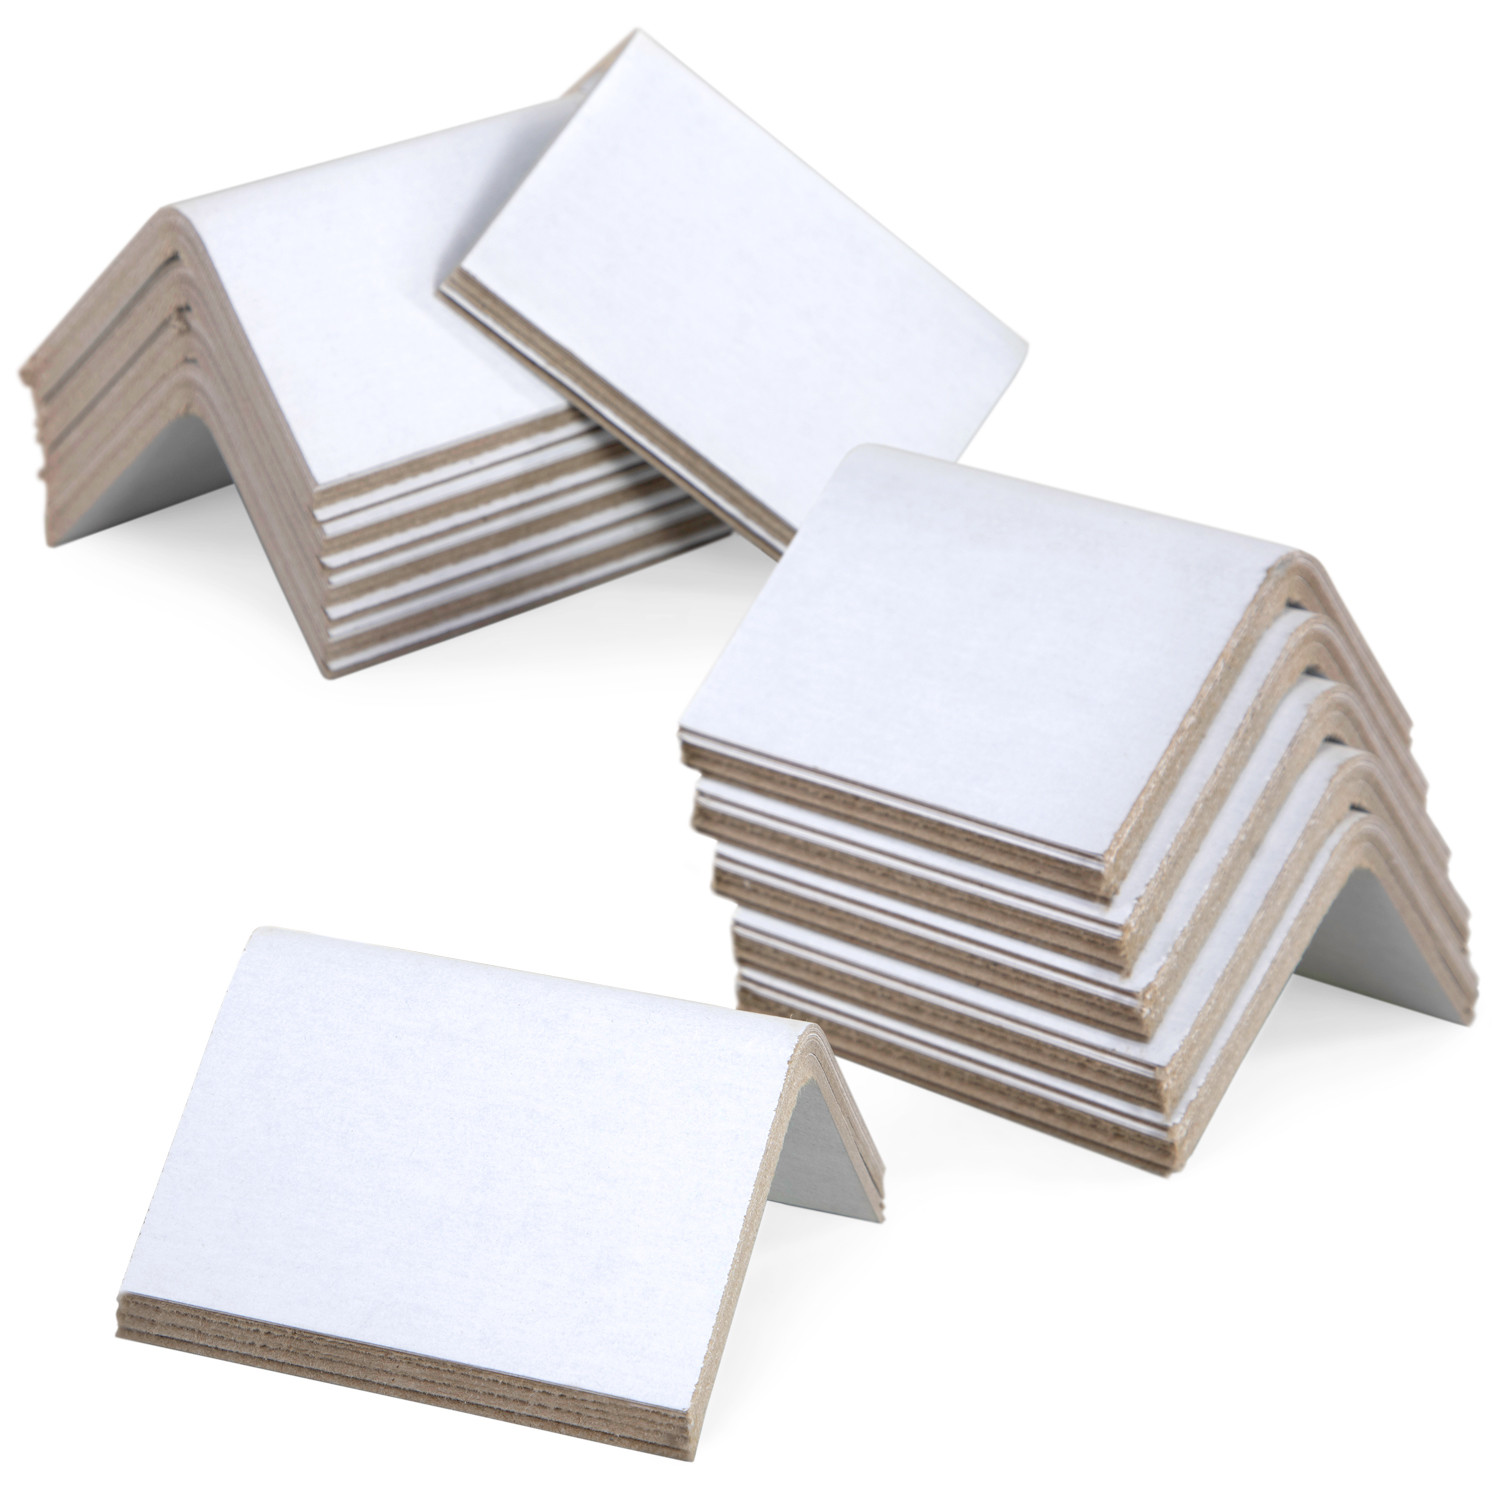 Idl Packaging Cardboard Edge Protectors 2 inch x 2 inch x 3 inch, Pack of 50, White, 0.160 inch Thick